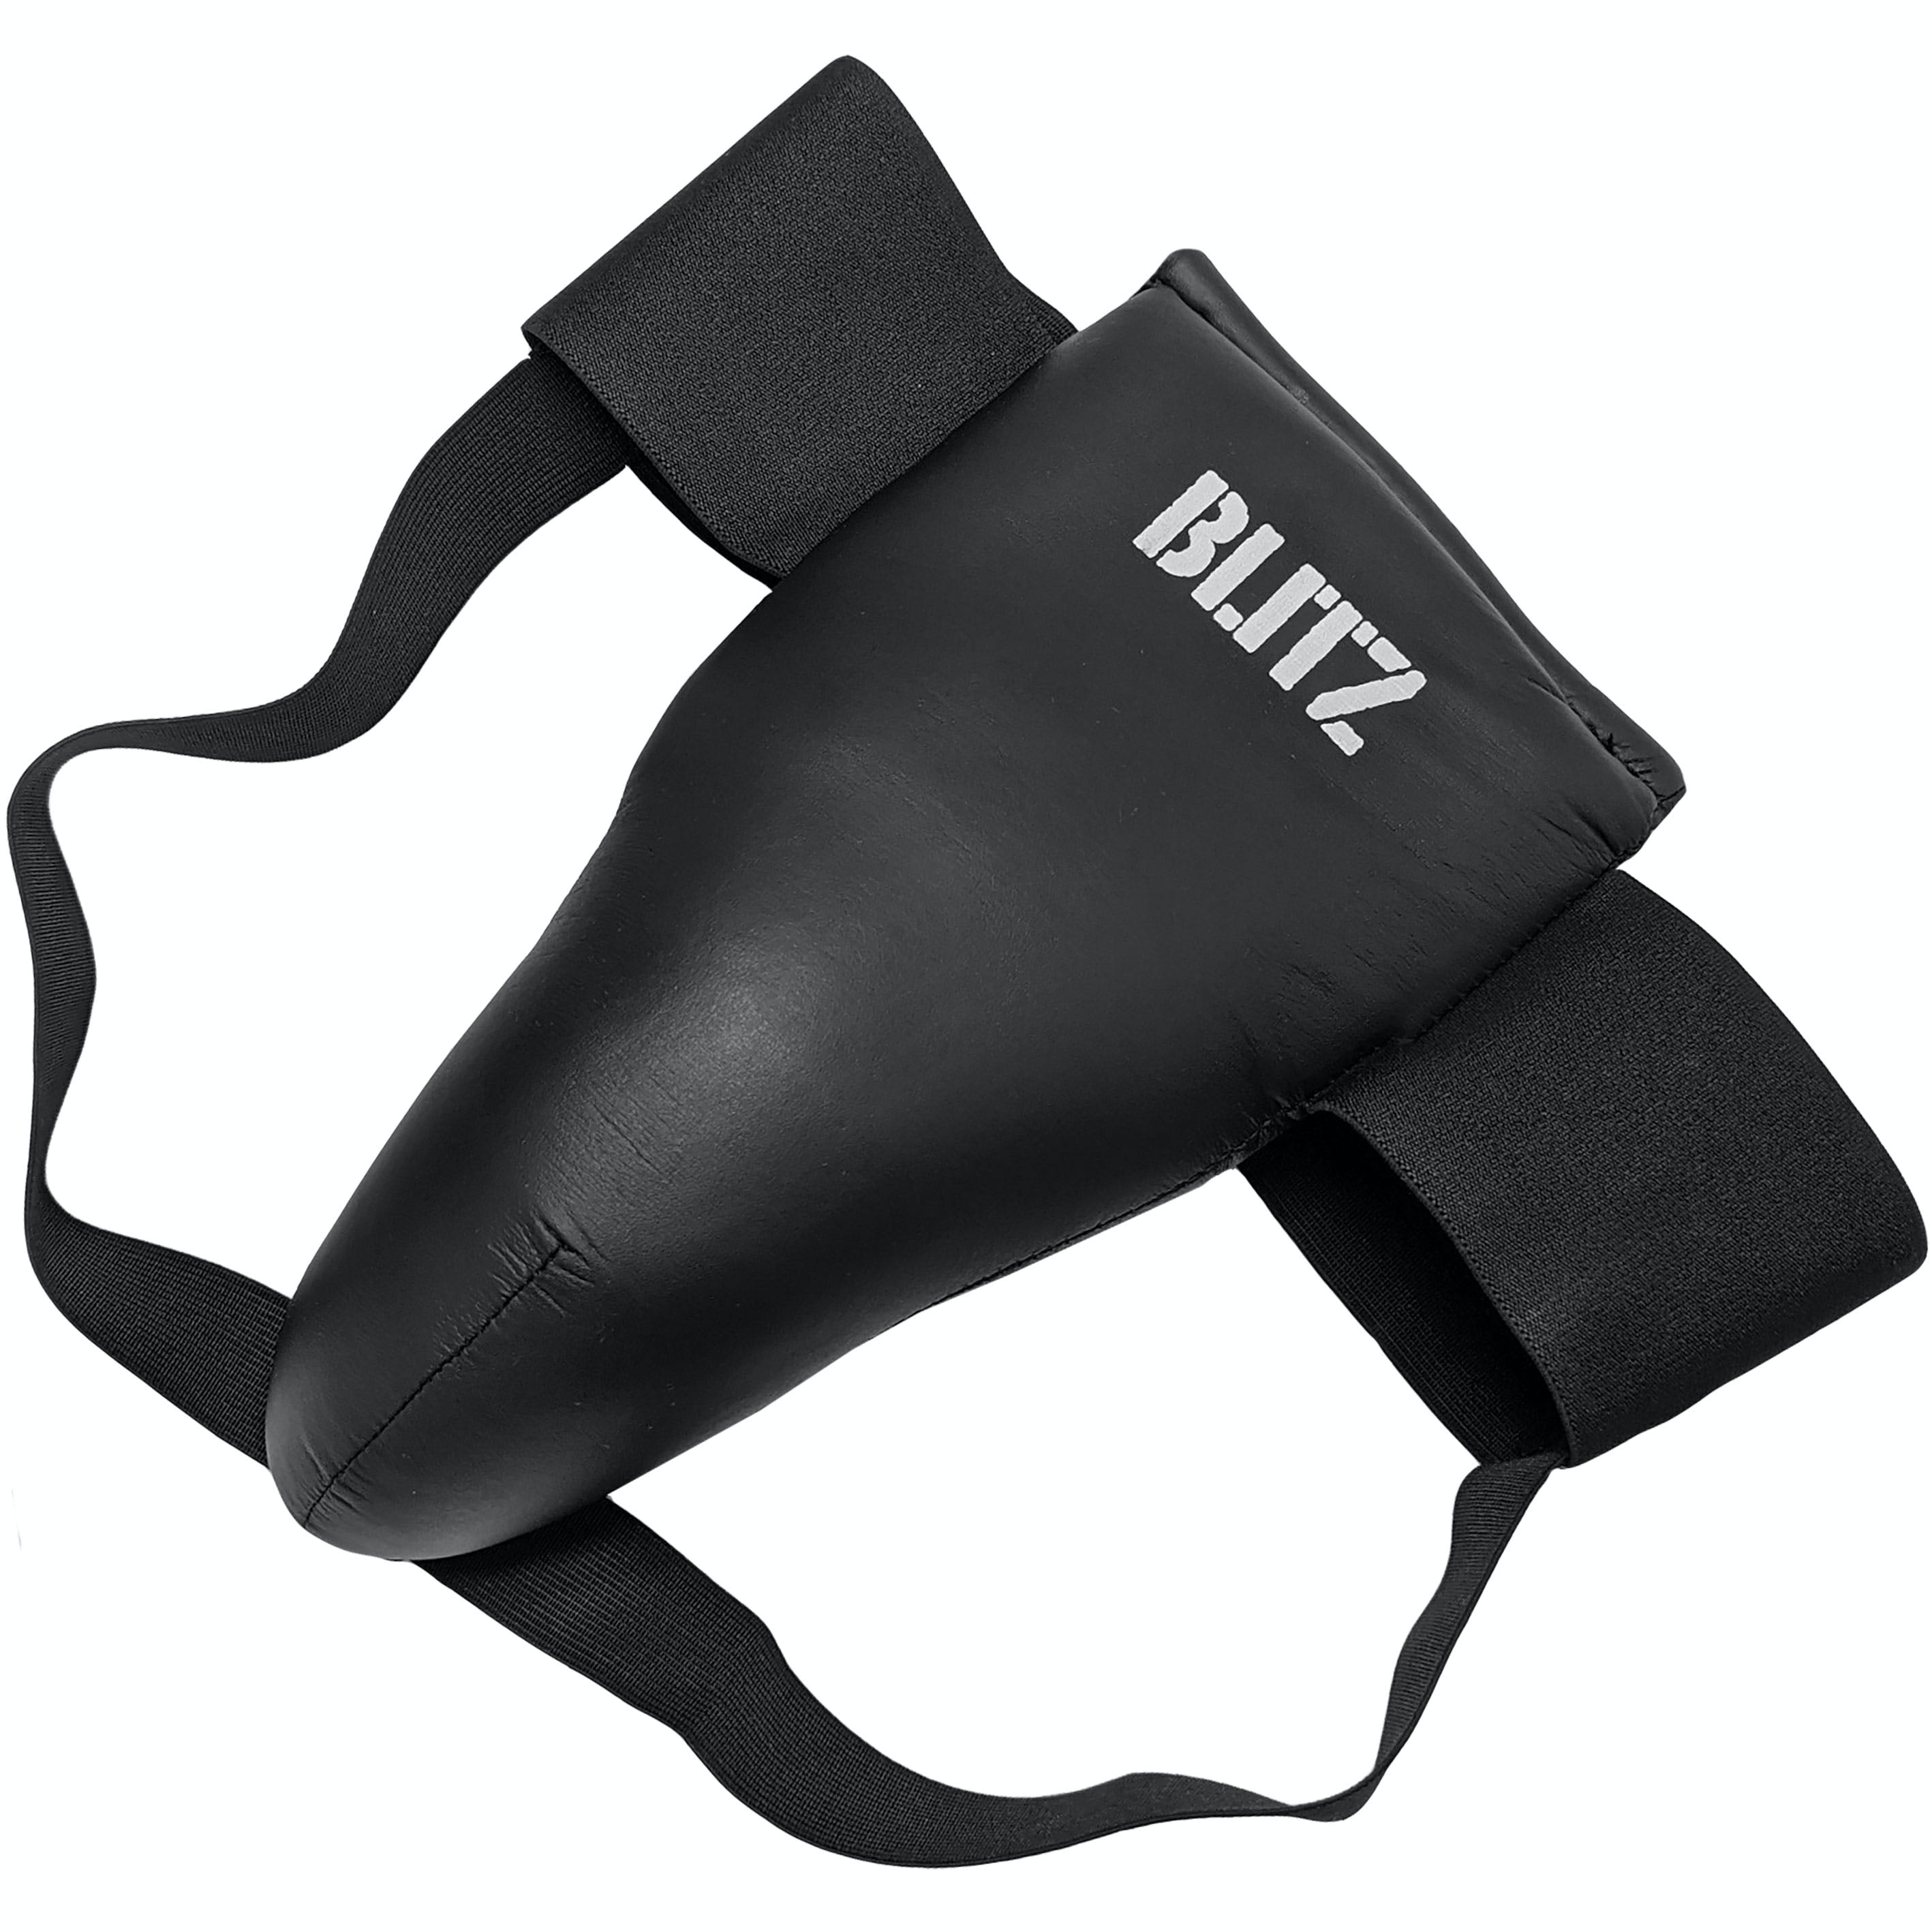 Blitz Deluxe Male Groin Guard